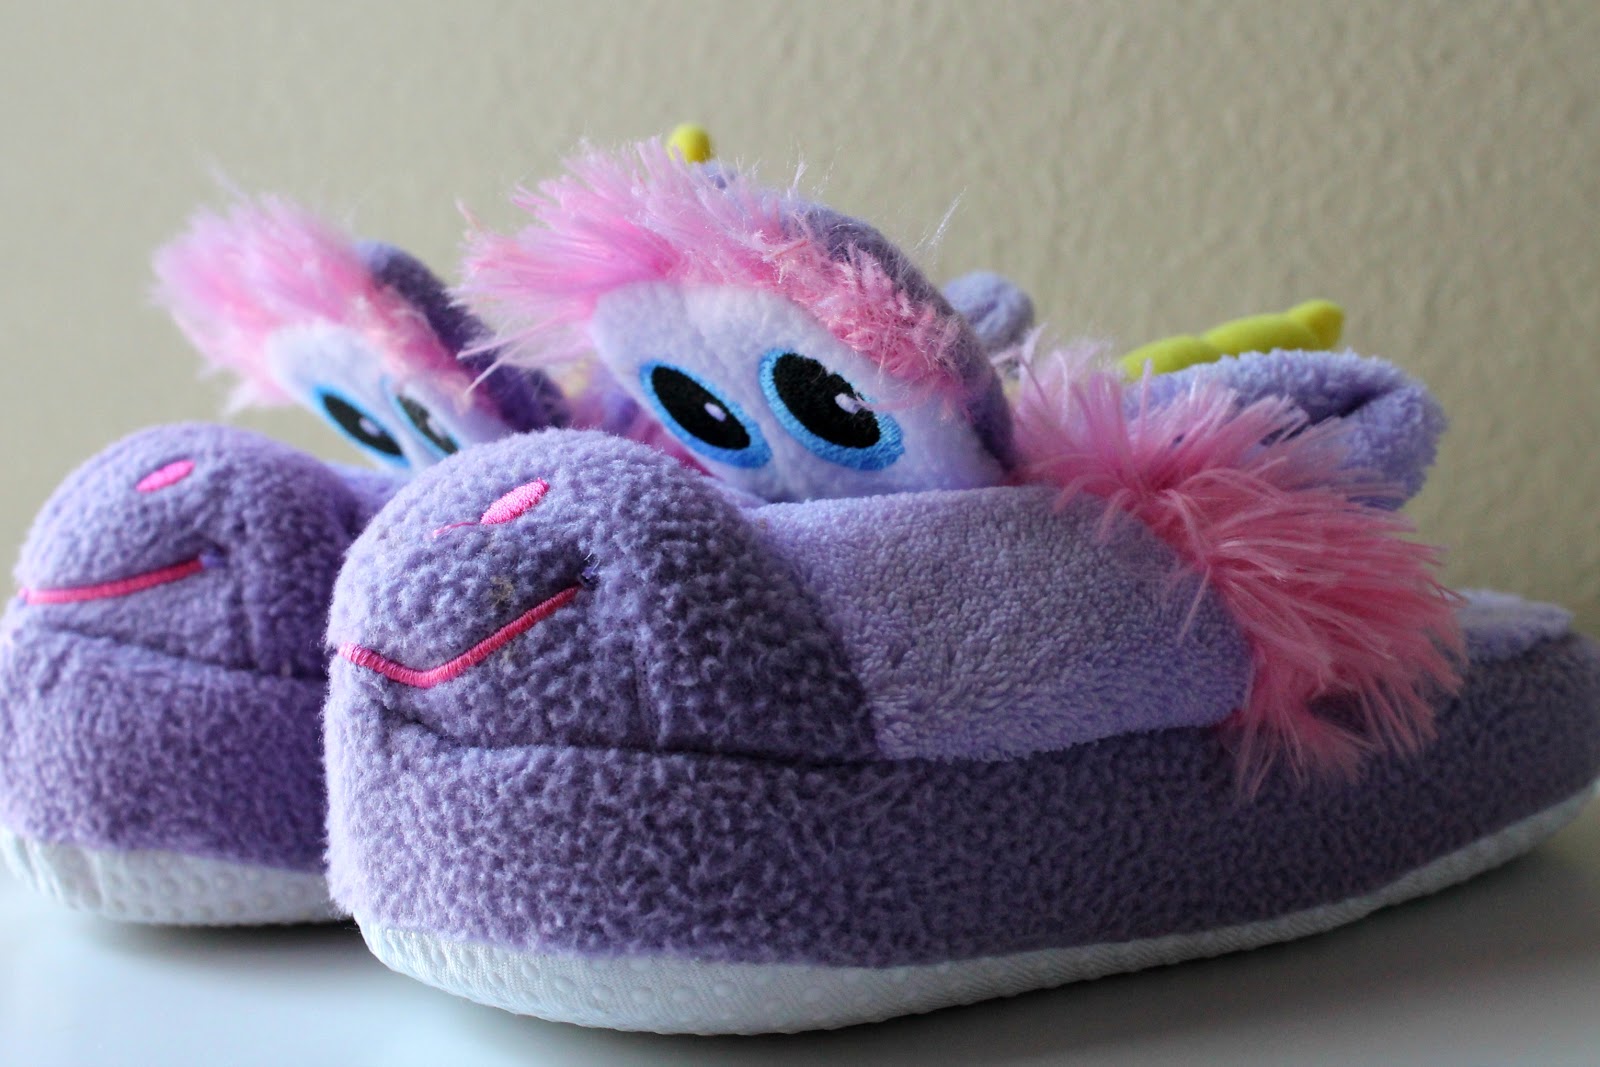 Stompeez Slippers Size Chart